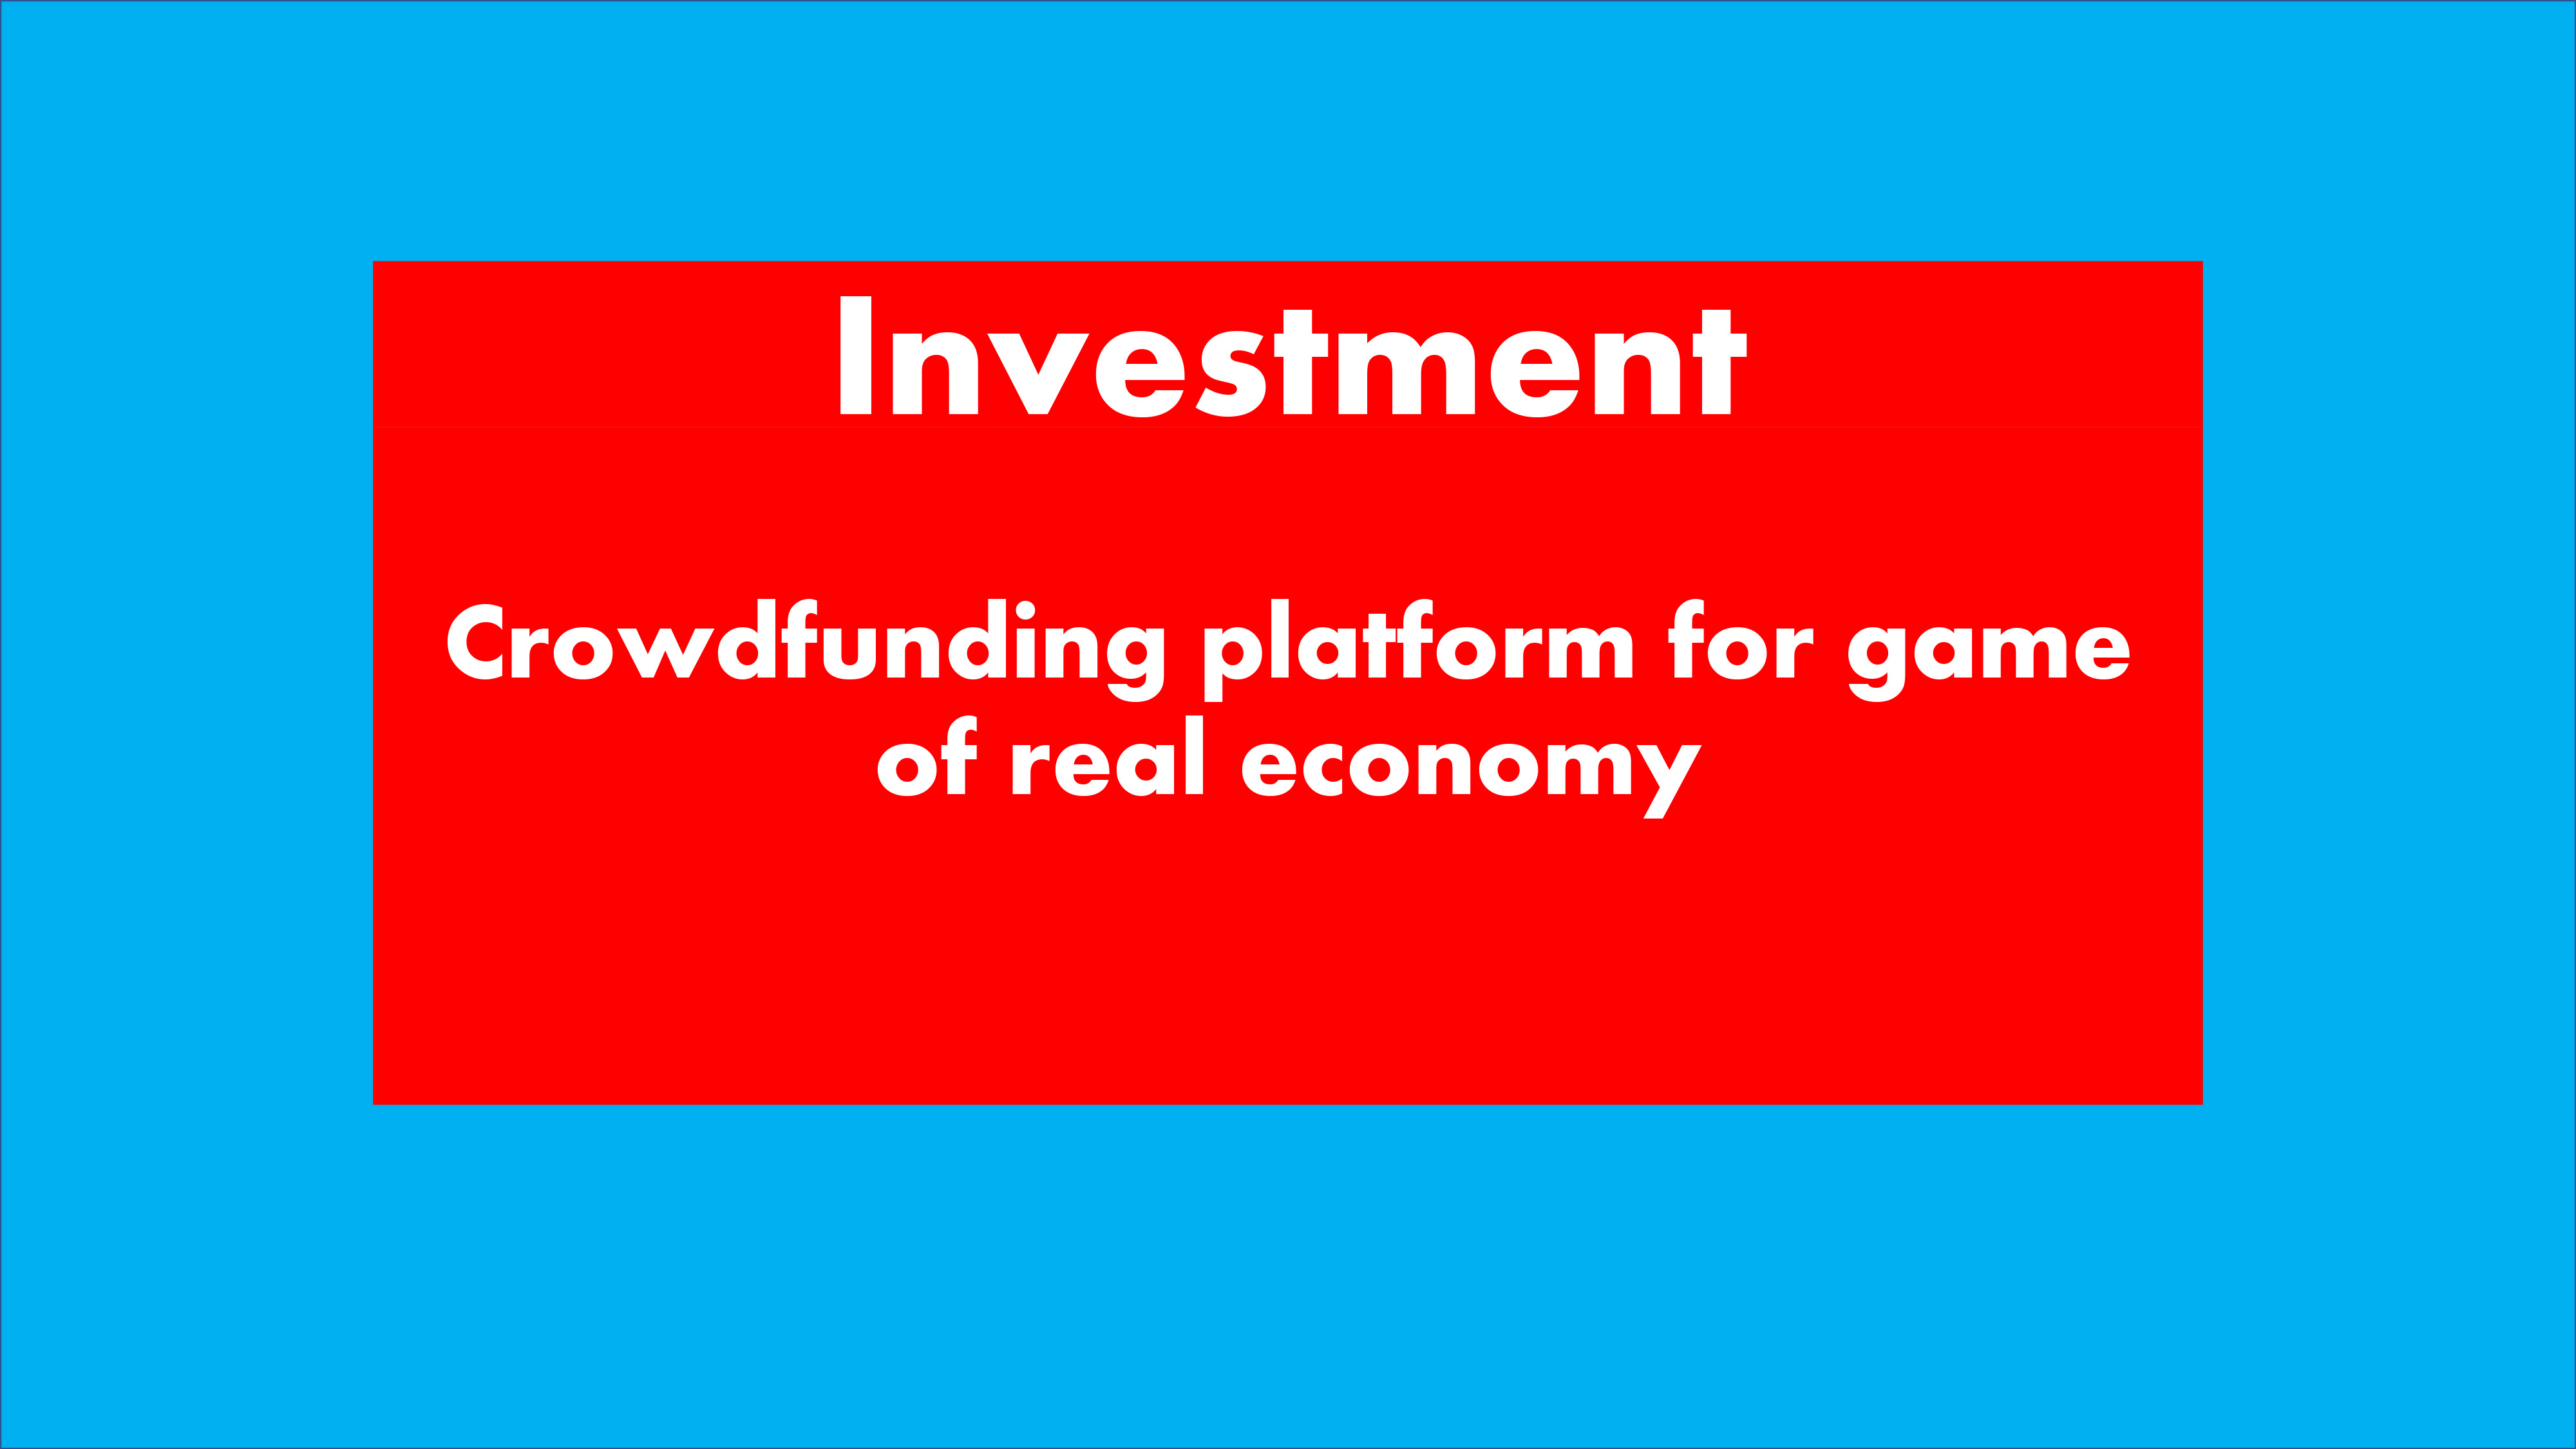 Crowdfunding platform for game of real economy